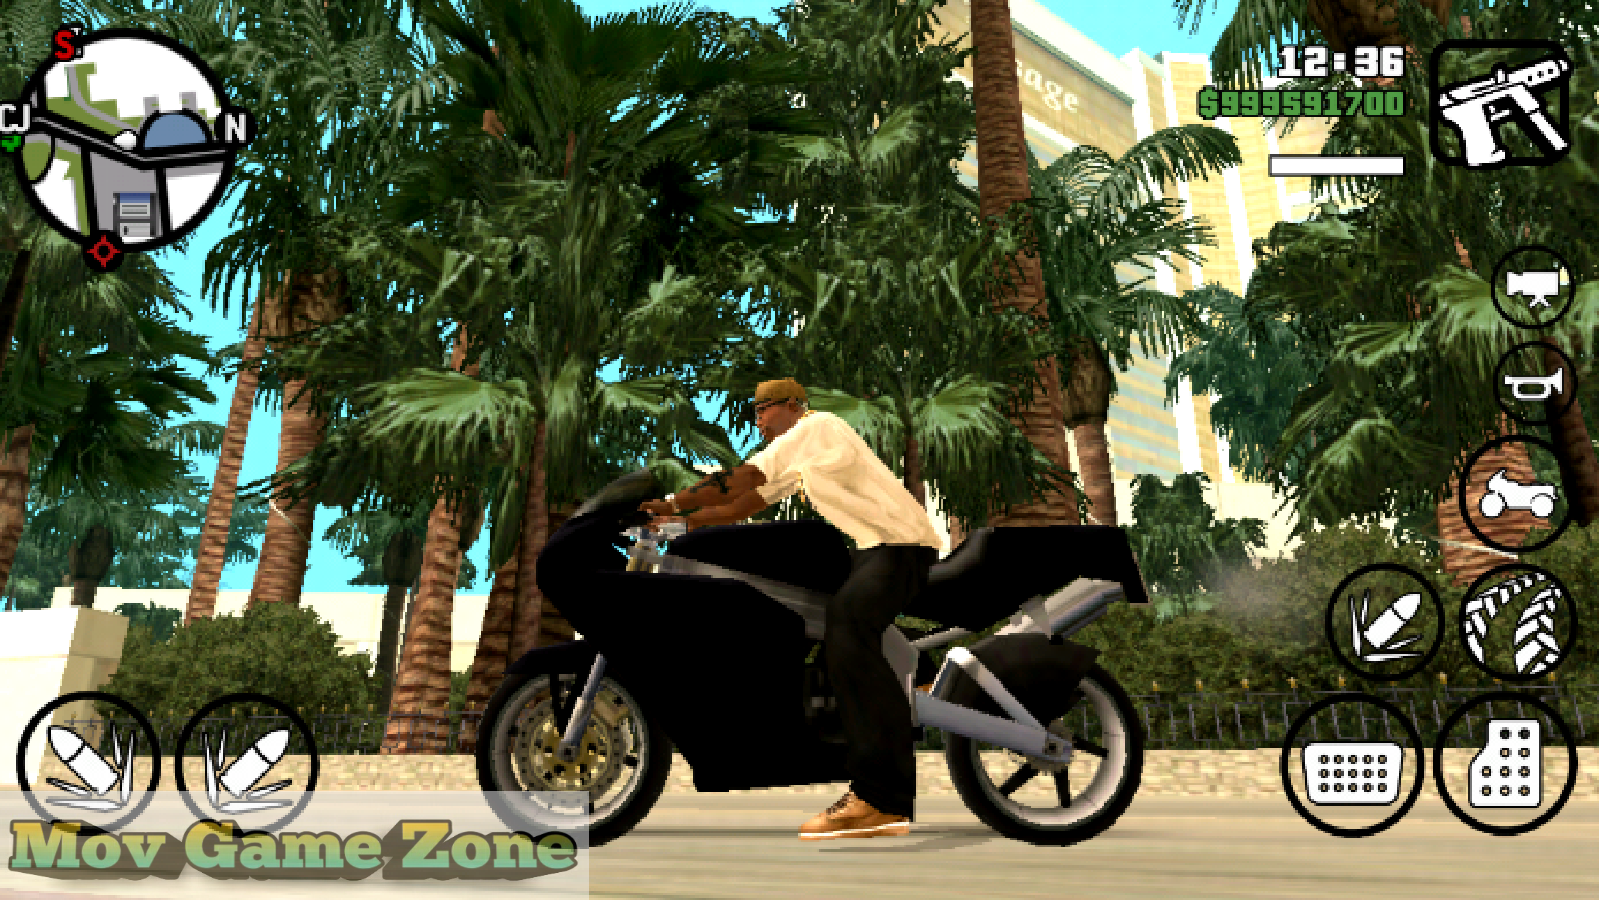 Gta San Andreas Iso File Download For Ppsspp  eventrenew